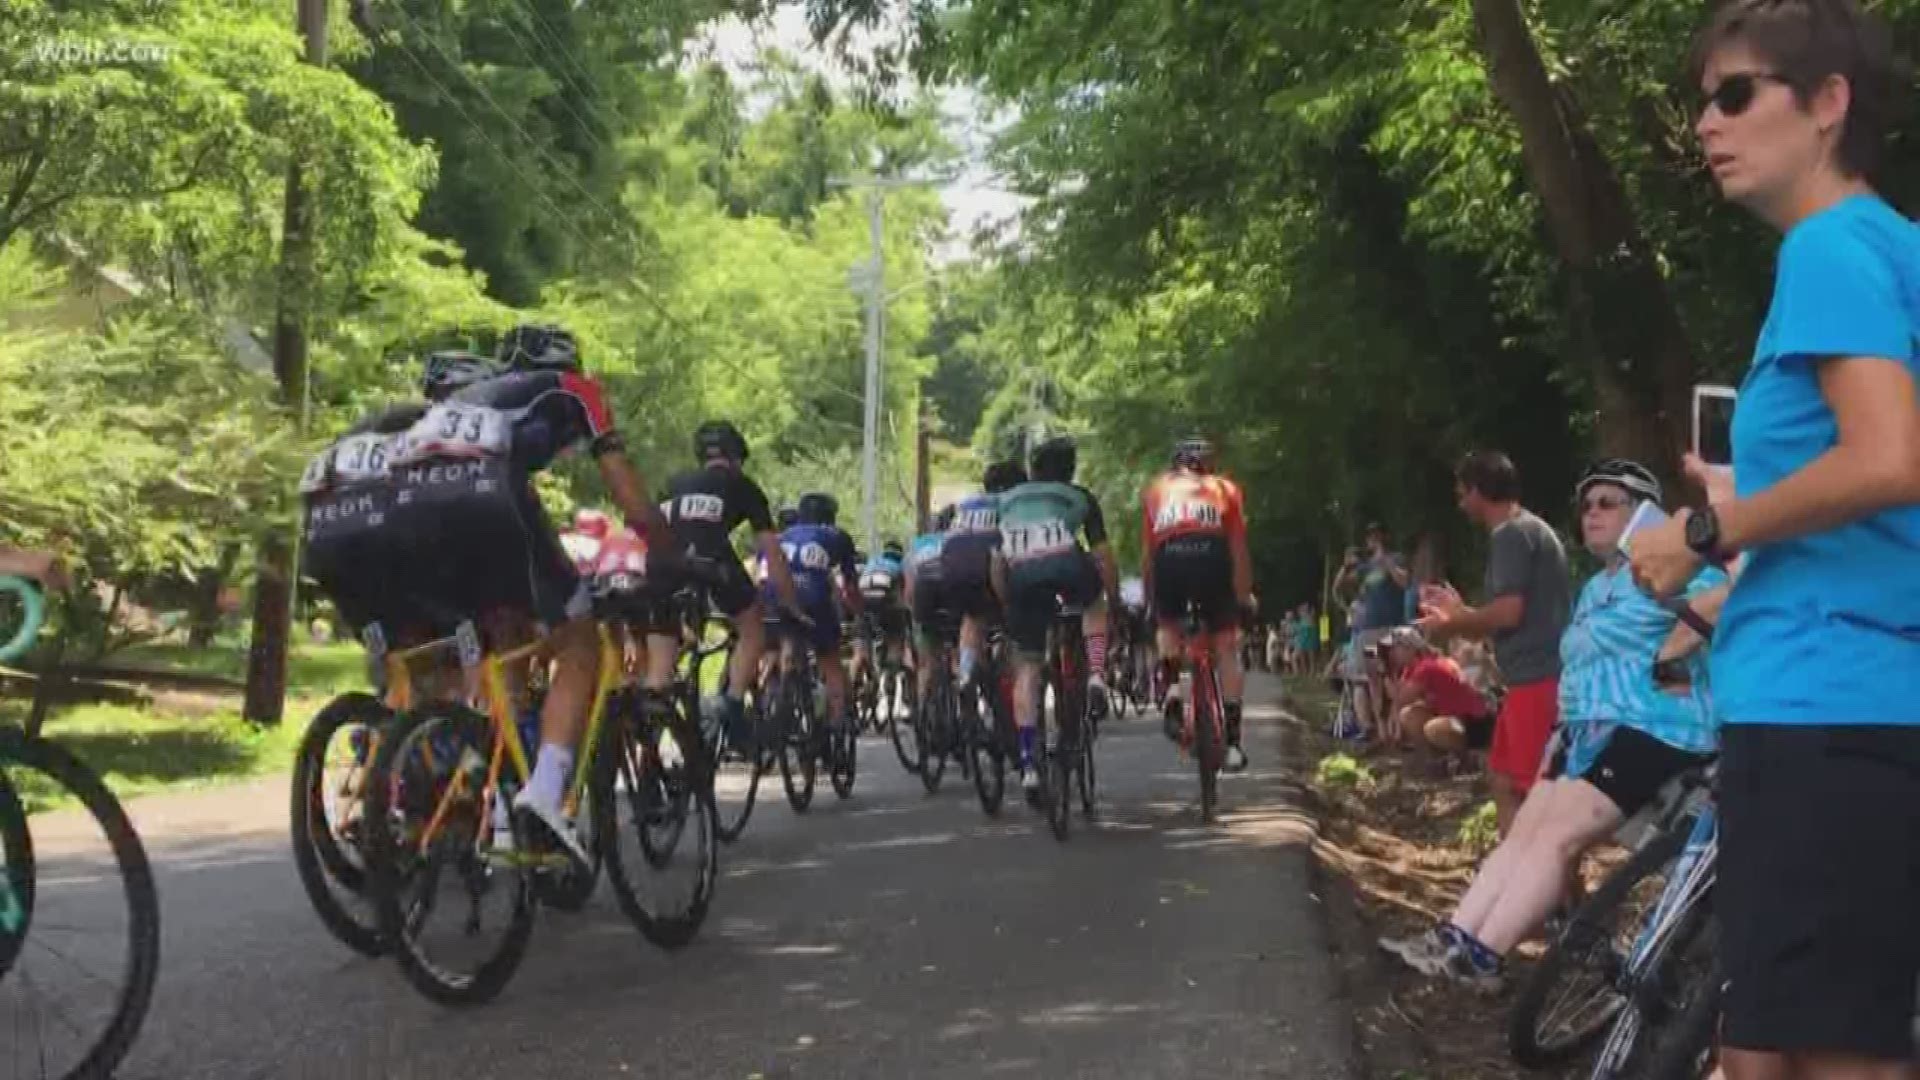 The USA Cycling Pro Road Championships are back in Knoxville this week. This is the third year the city has hosted the races. Last year it drew hundreds of cyclists.